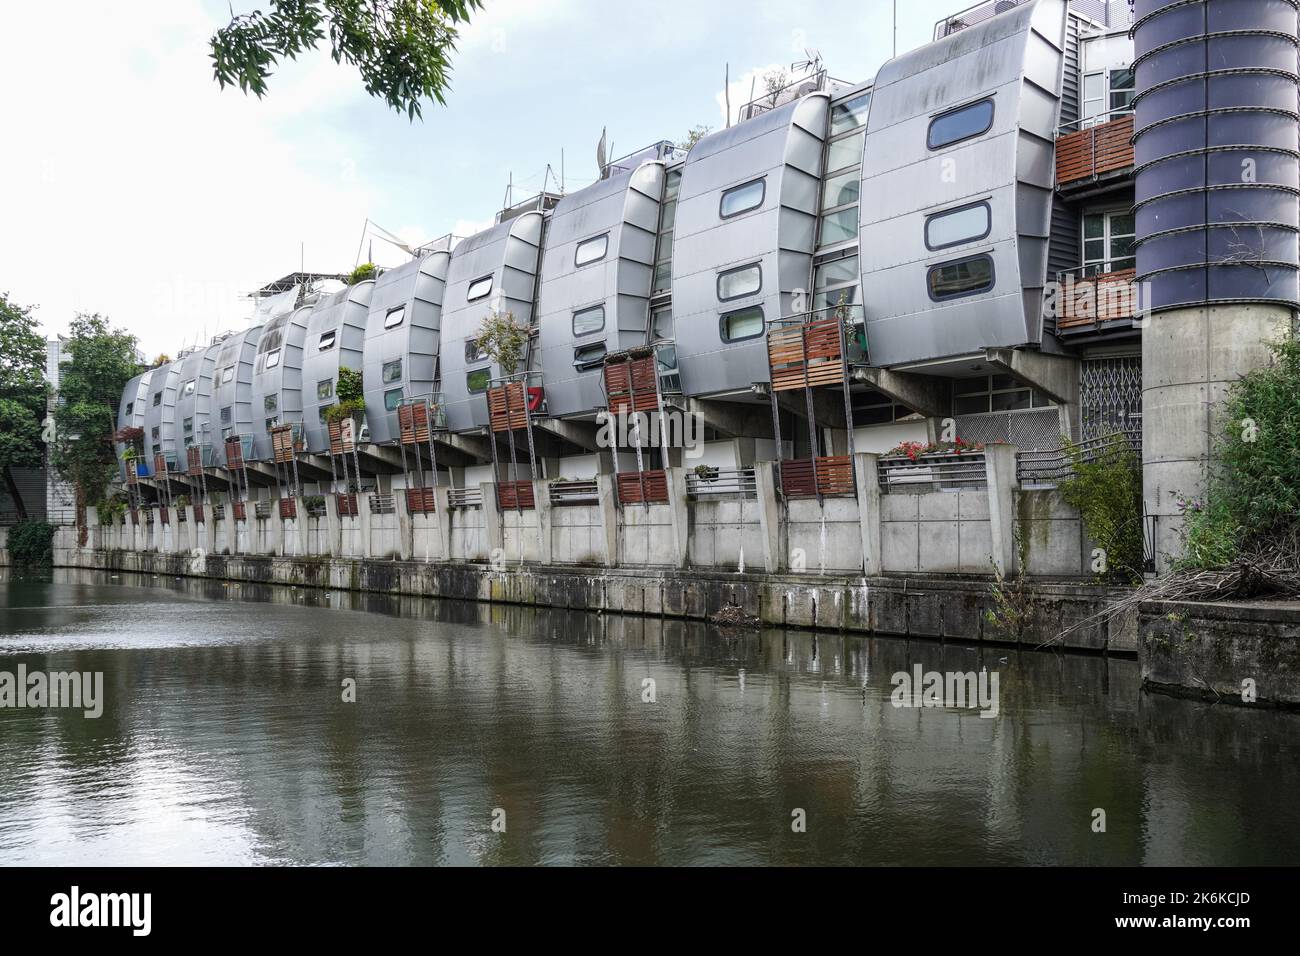 Grand Union Walk Housing by the Regents Canal in Camden Town, London England United Kingdom UK Stock Photo